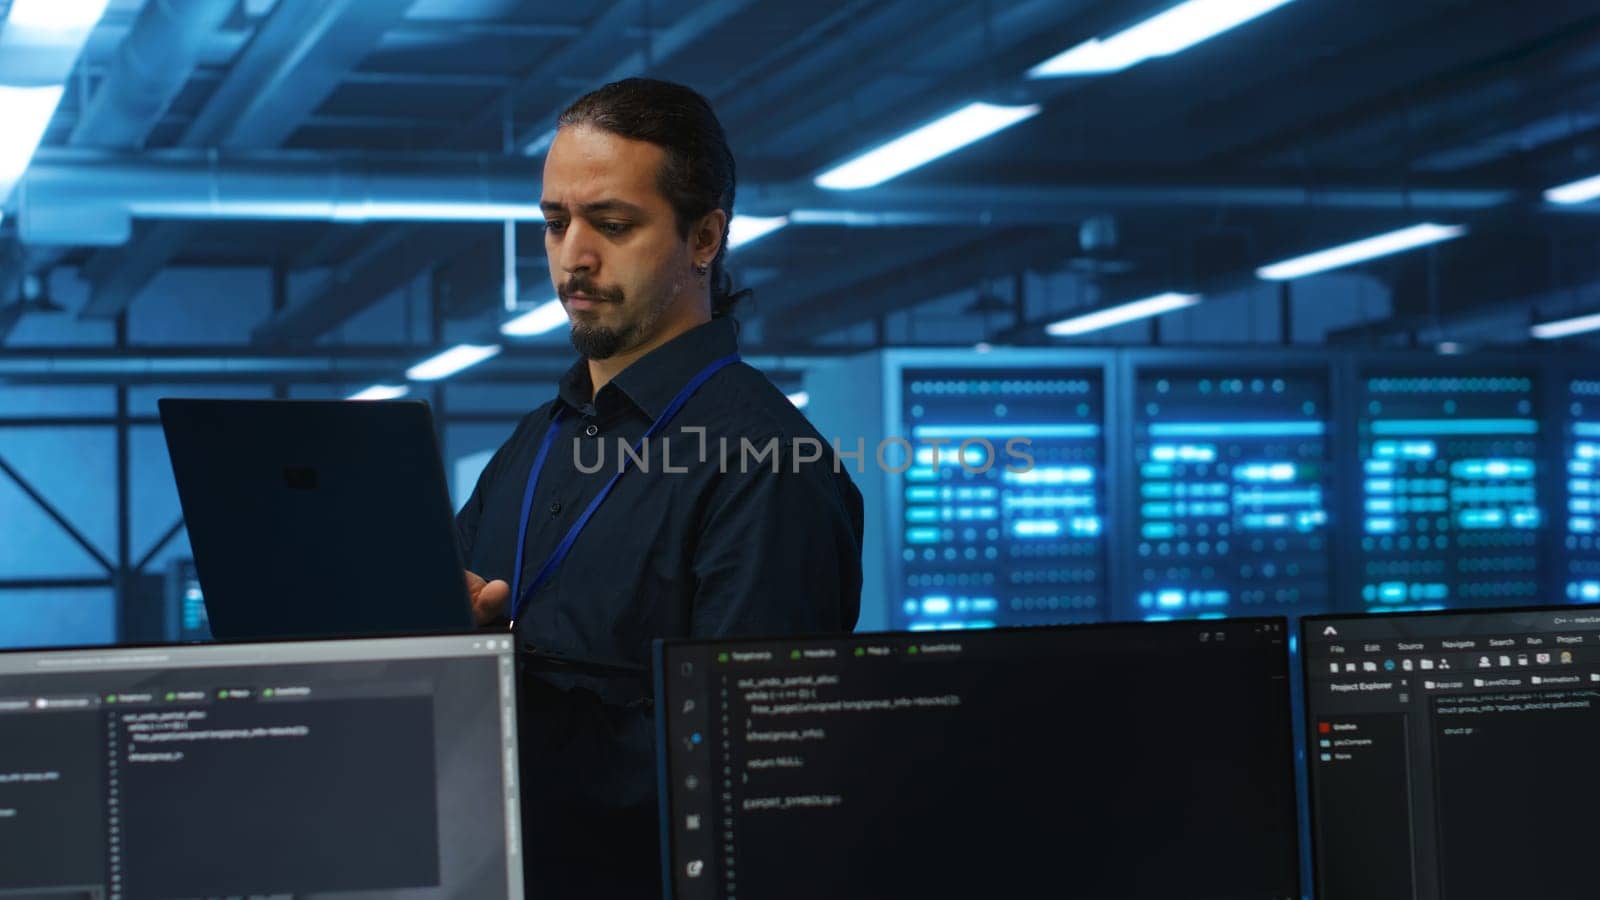 Manager overseeing server room, running code on laptop, troubleshooting and upgrading technologically advanced hardware clusters. System administrator programming in server farm